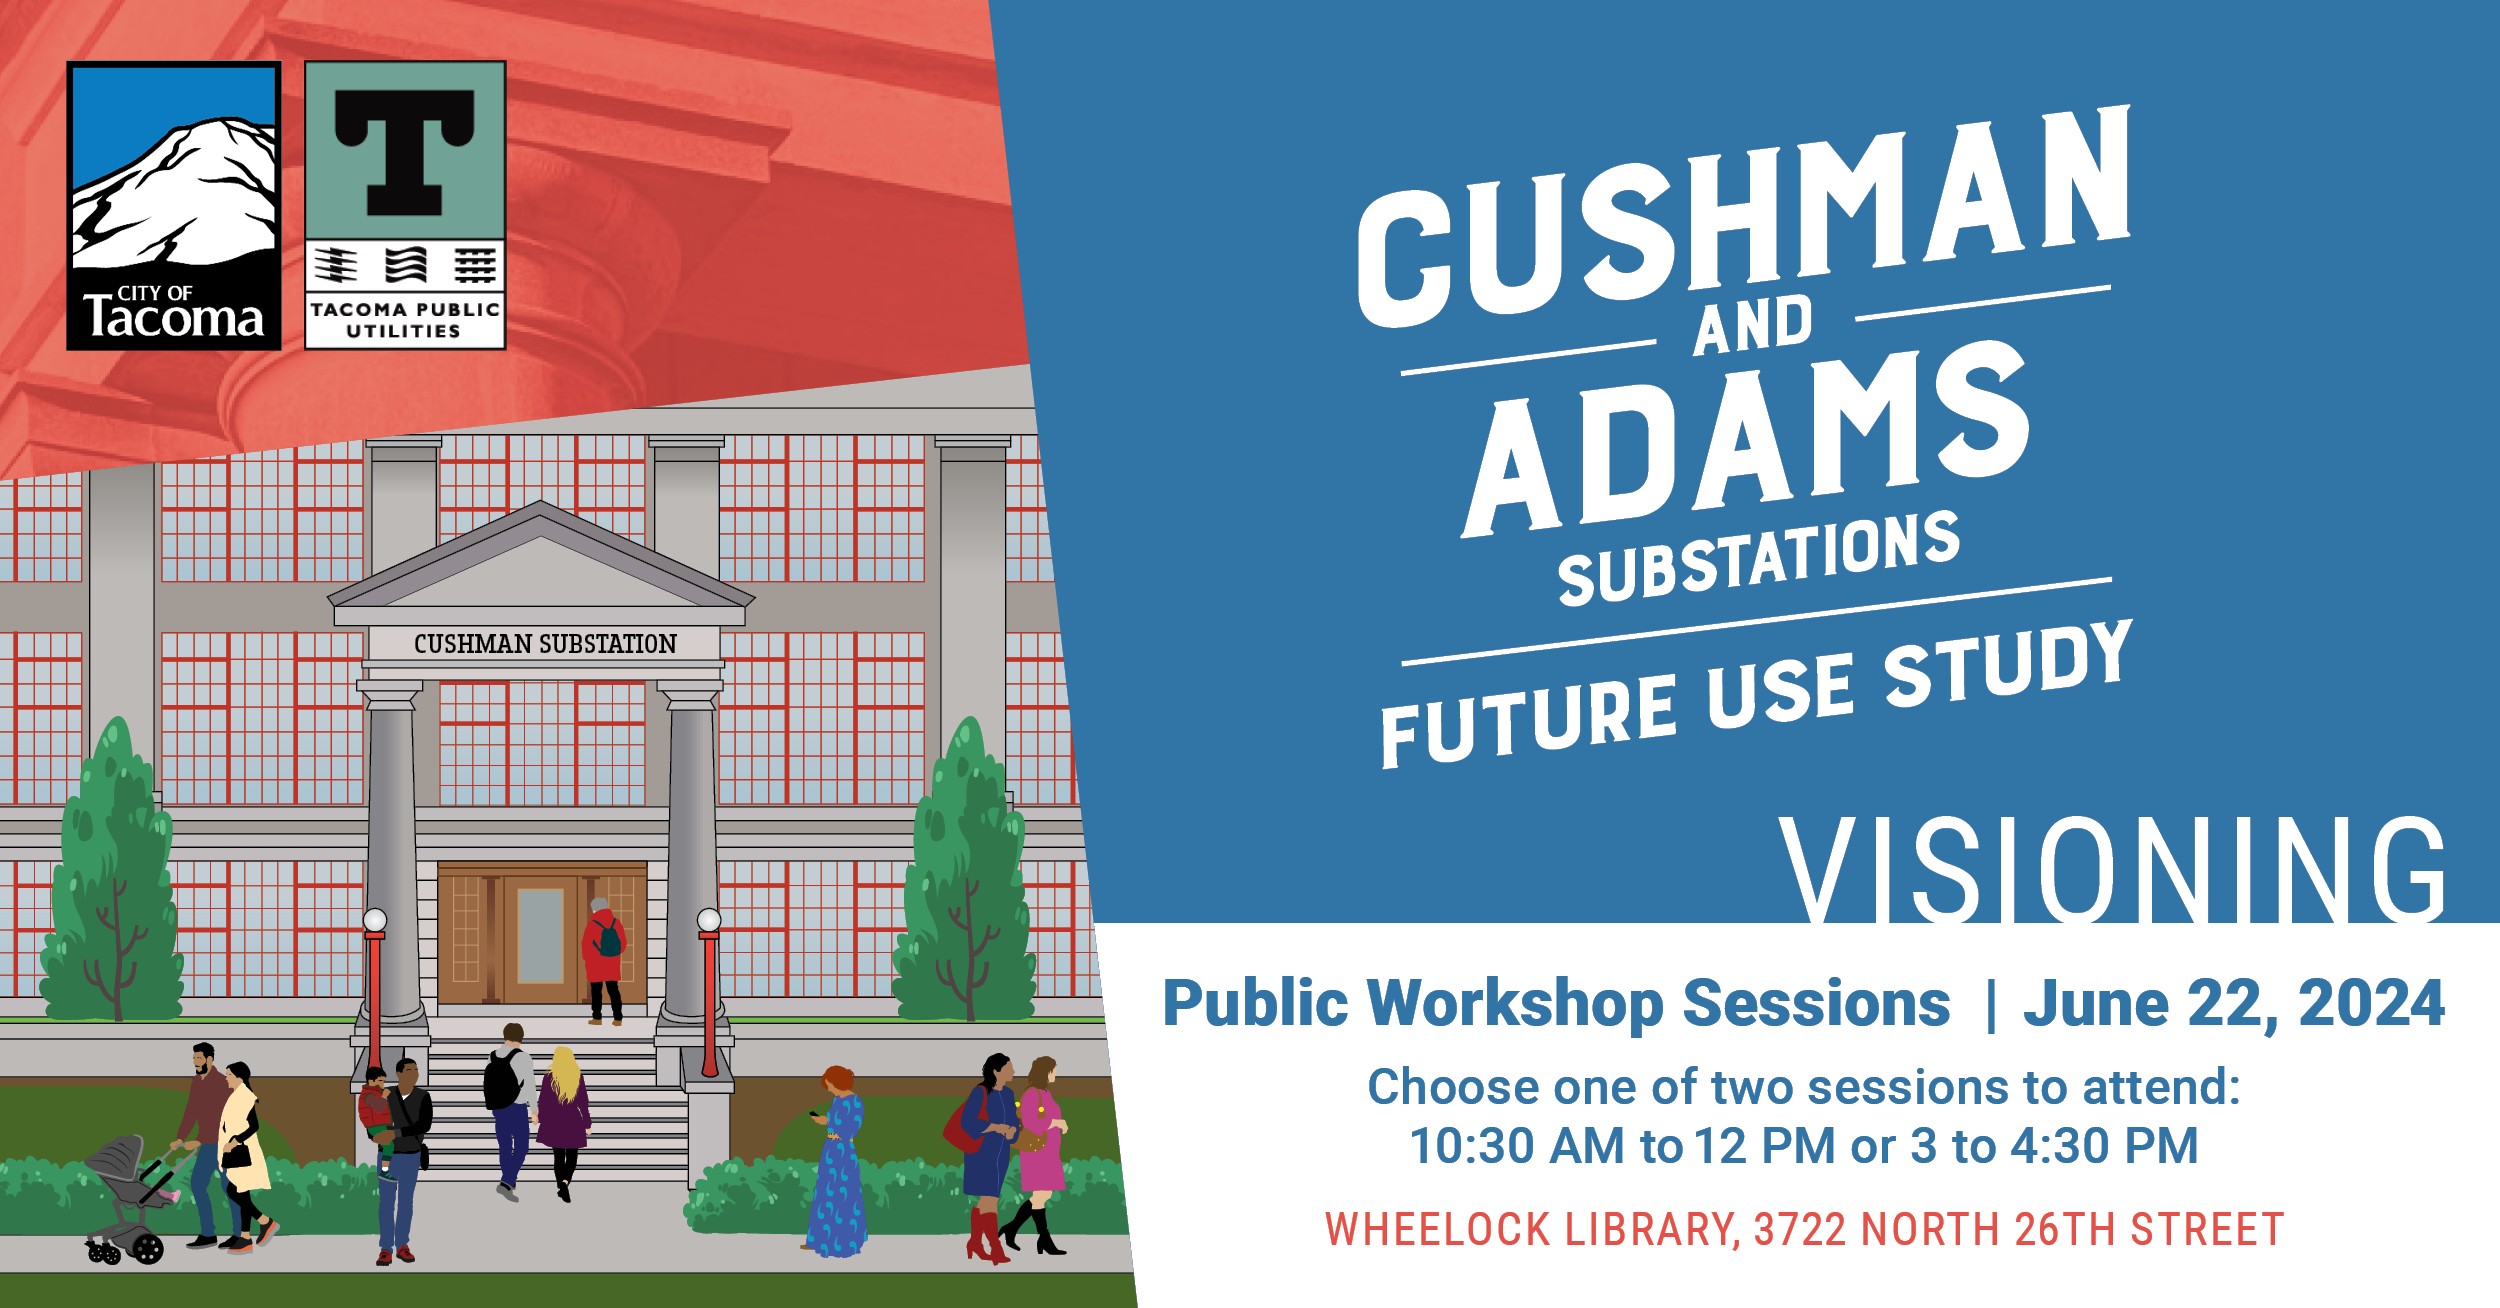 The event banner for the Cushman and Adams Substations Future Use Study Visioning Workshop on June 22